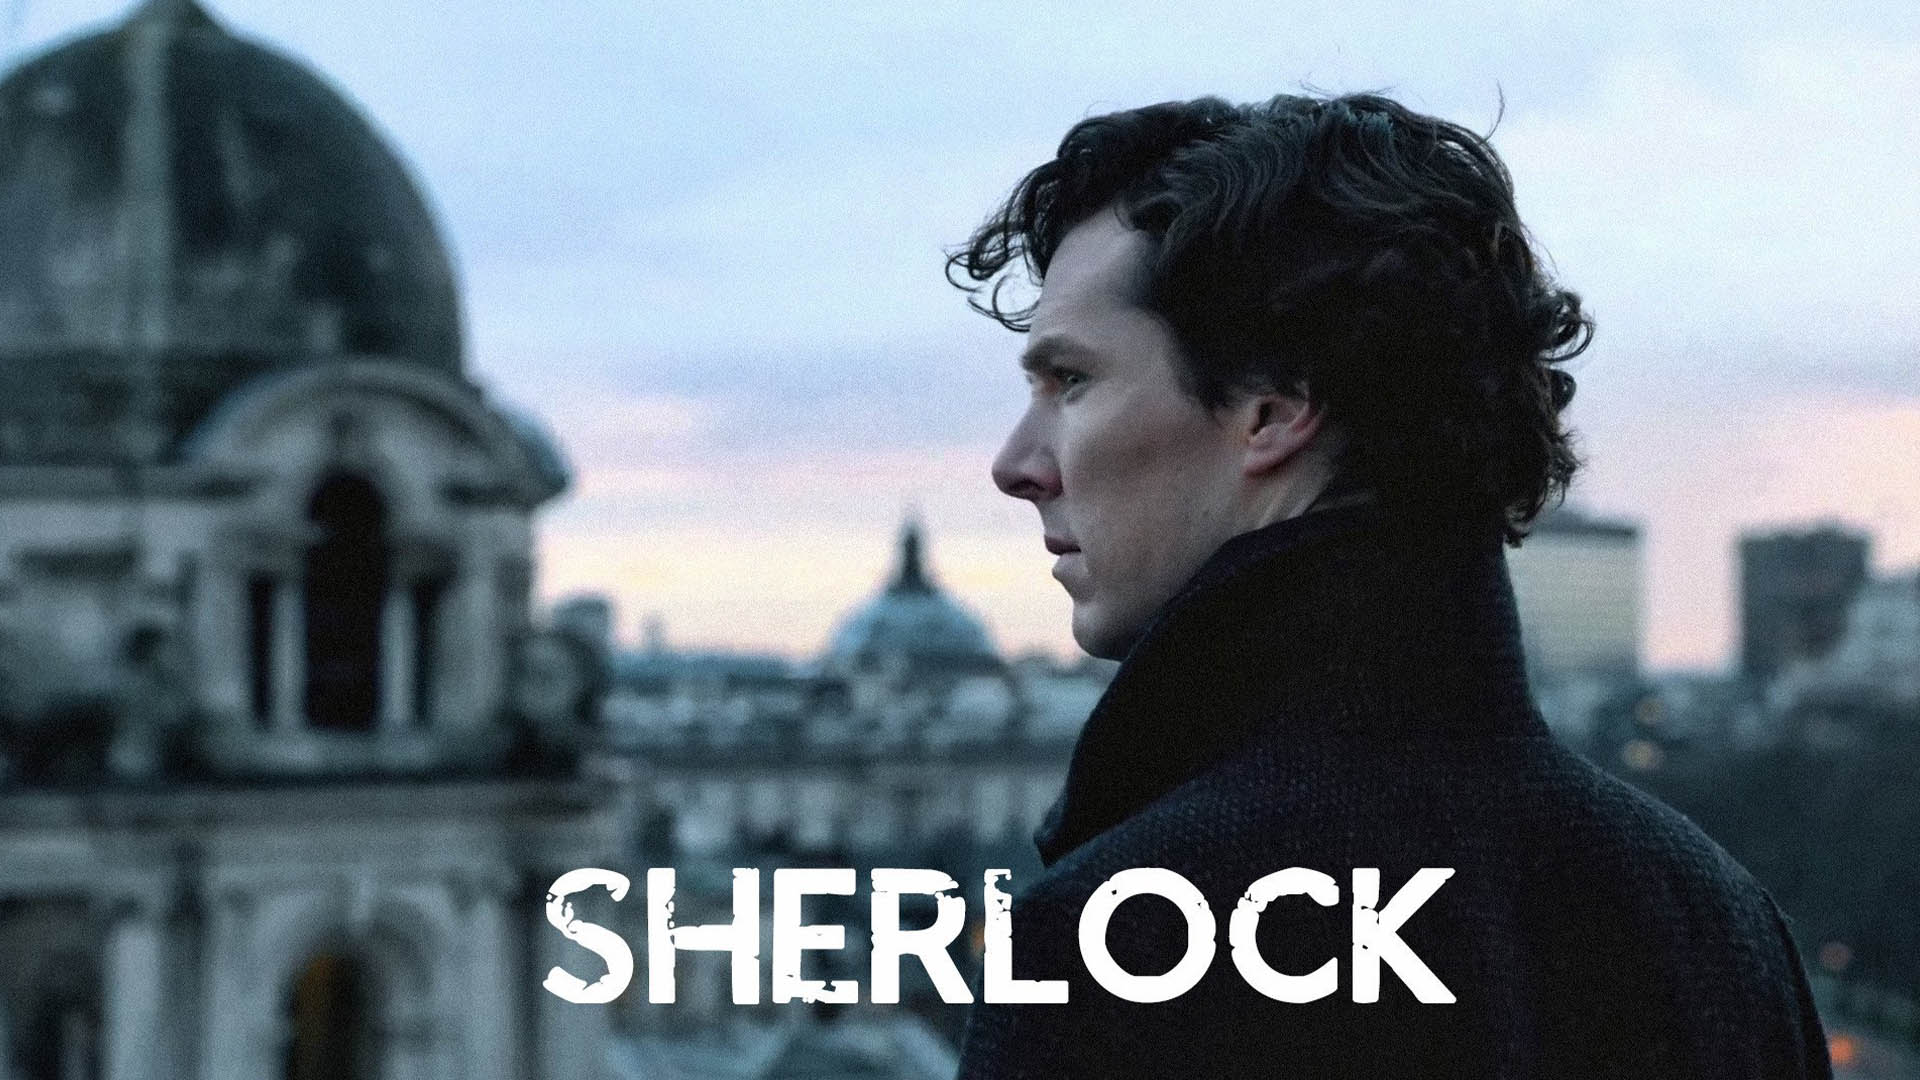 Sherlock cover with a profile view of Benedict Cumberbatch